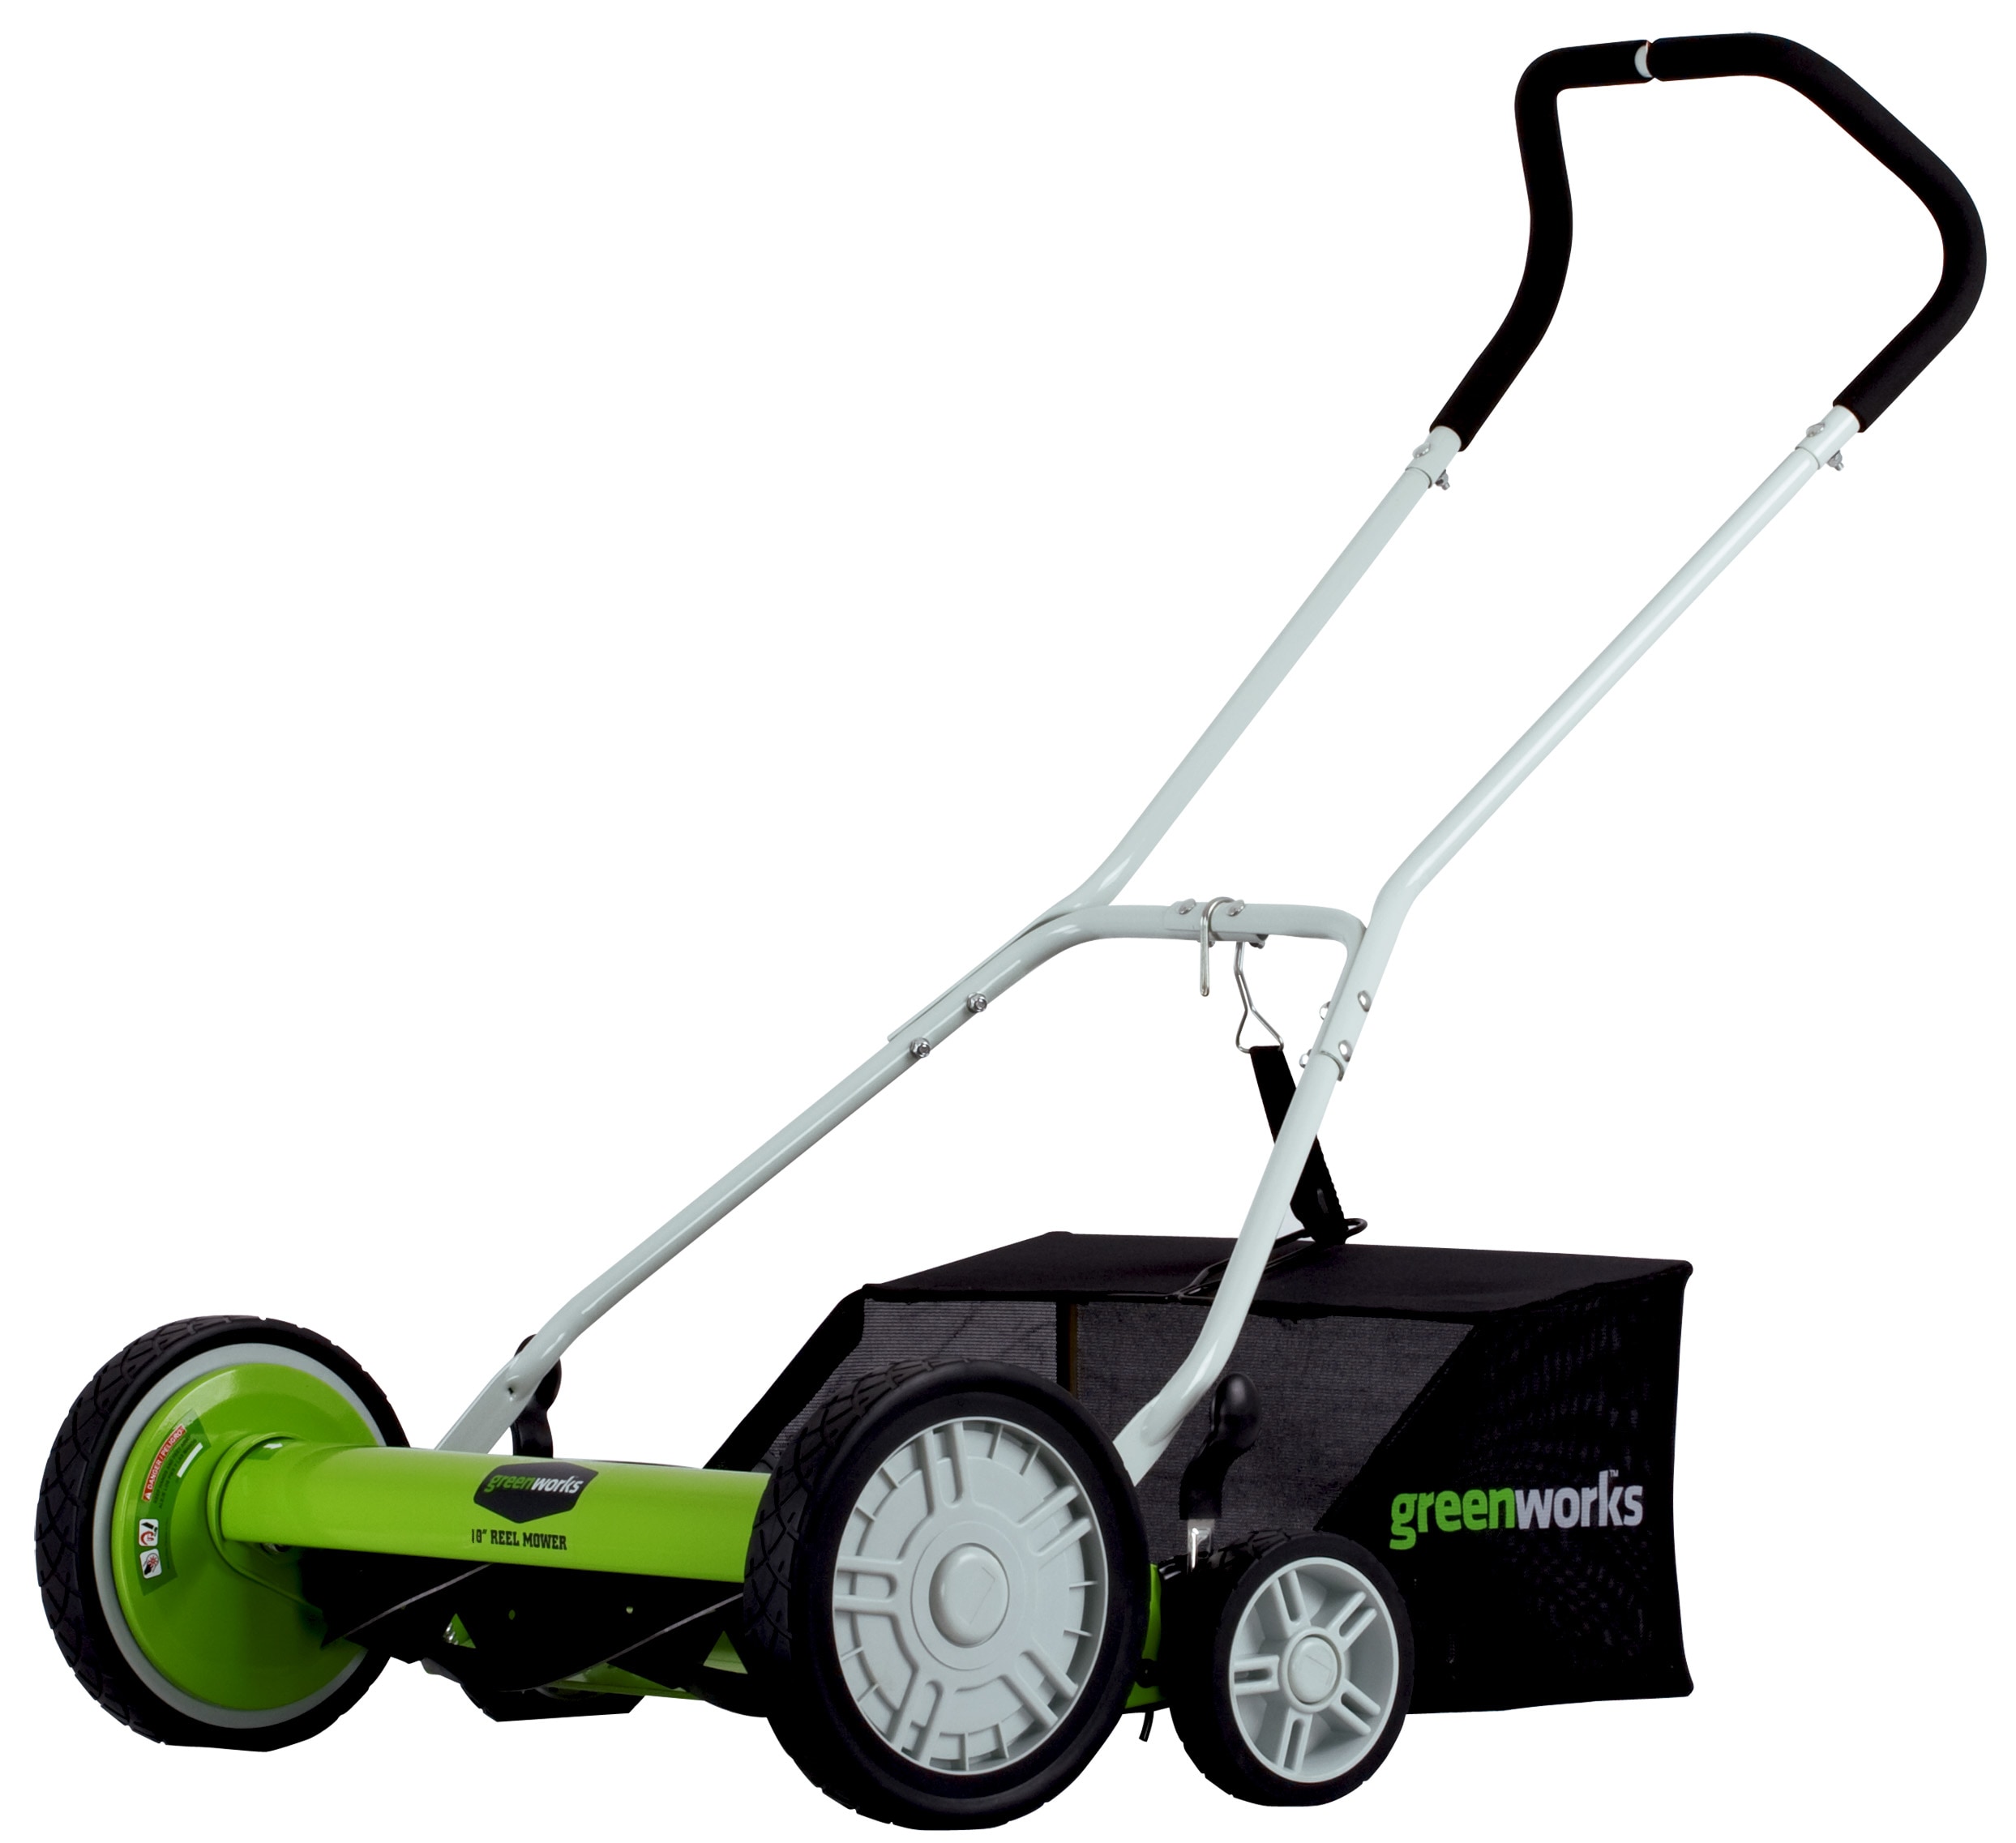 Greenworks 18-in Reel Lawn Mower with bagger at